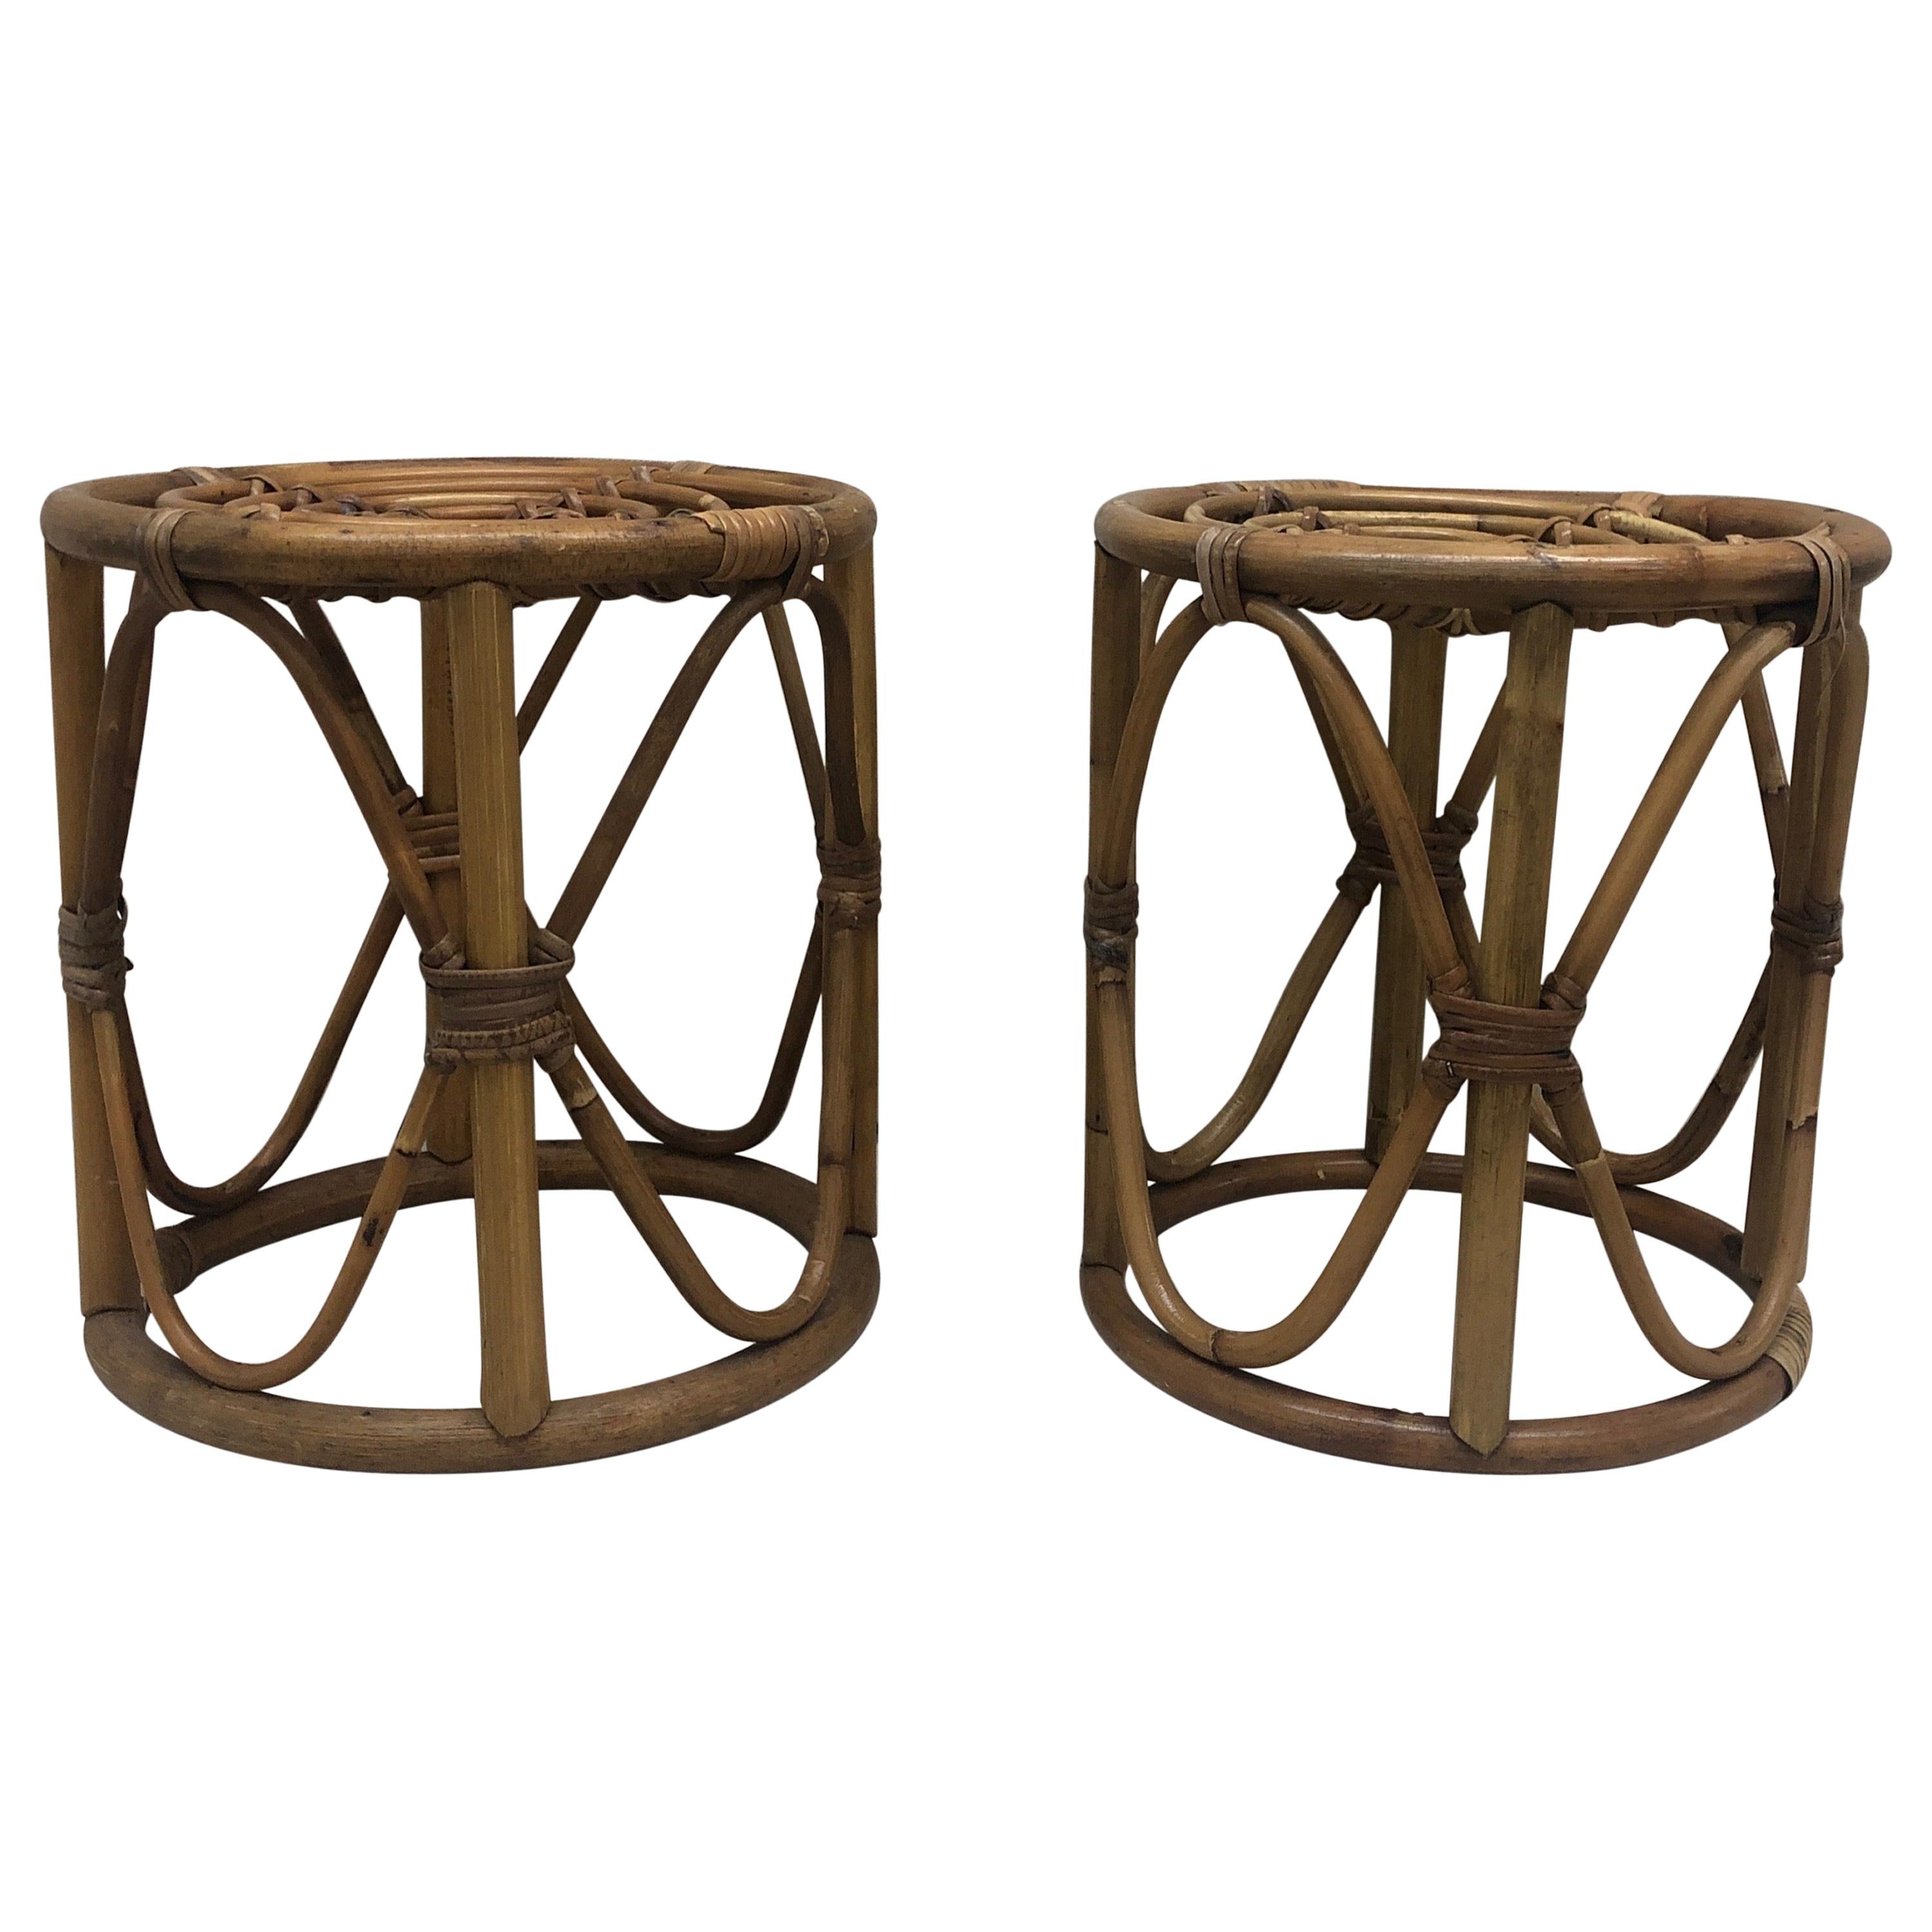 Pair of Vintage Bamboo and Rattan Round Stools or Side Tables